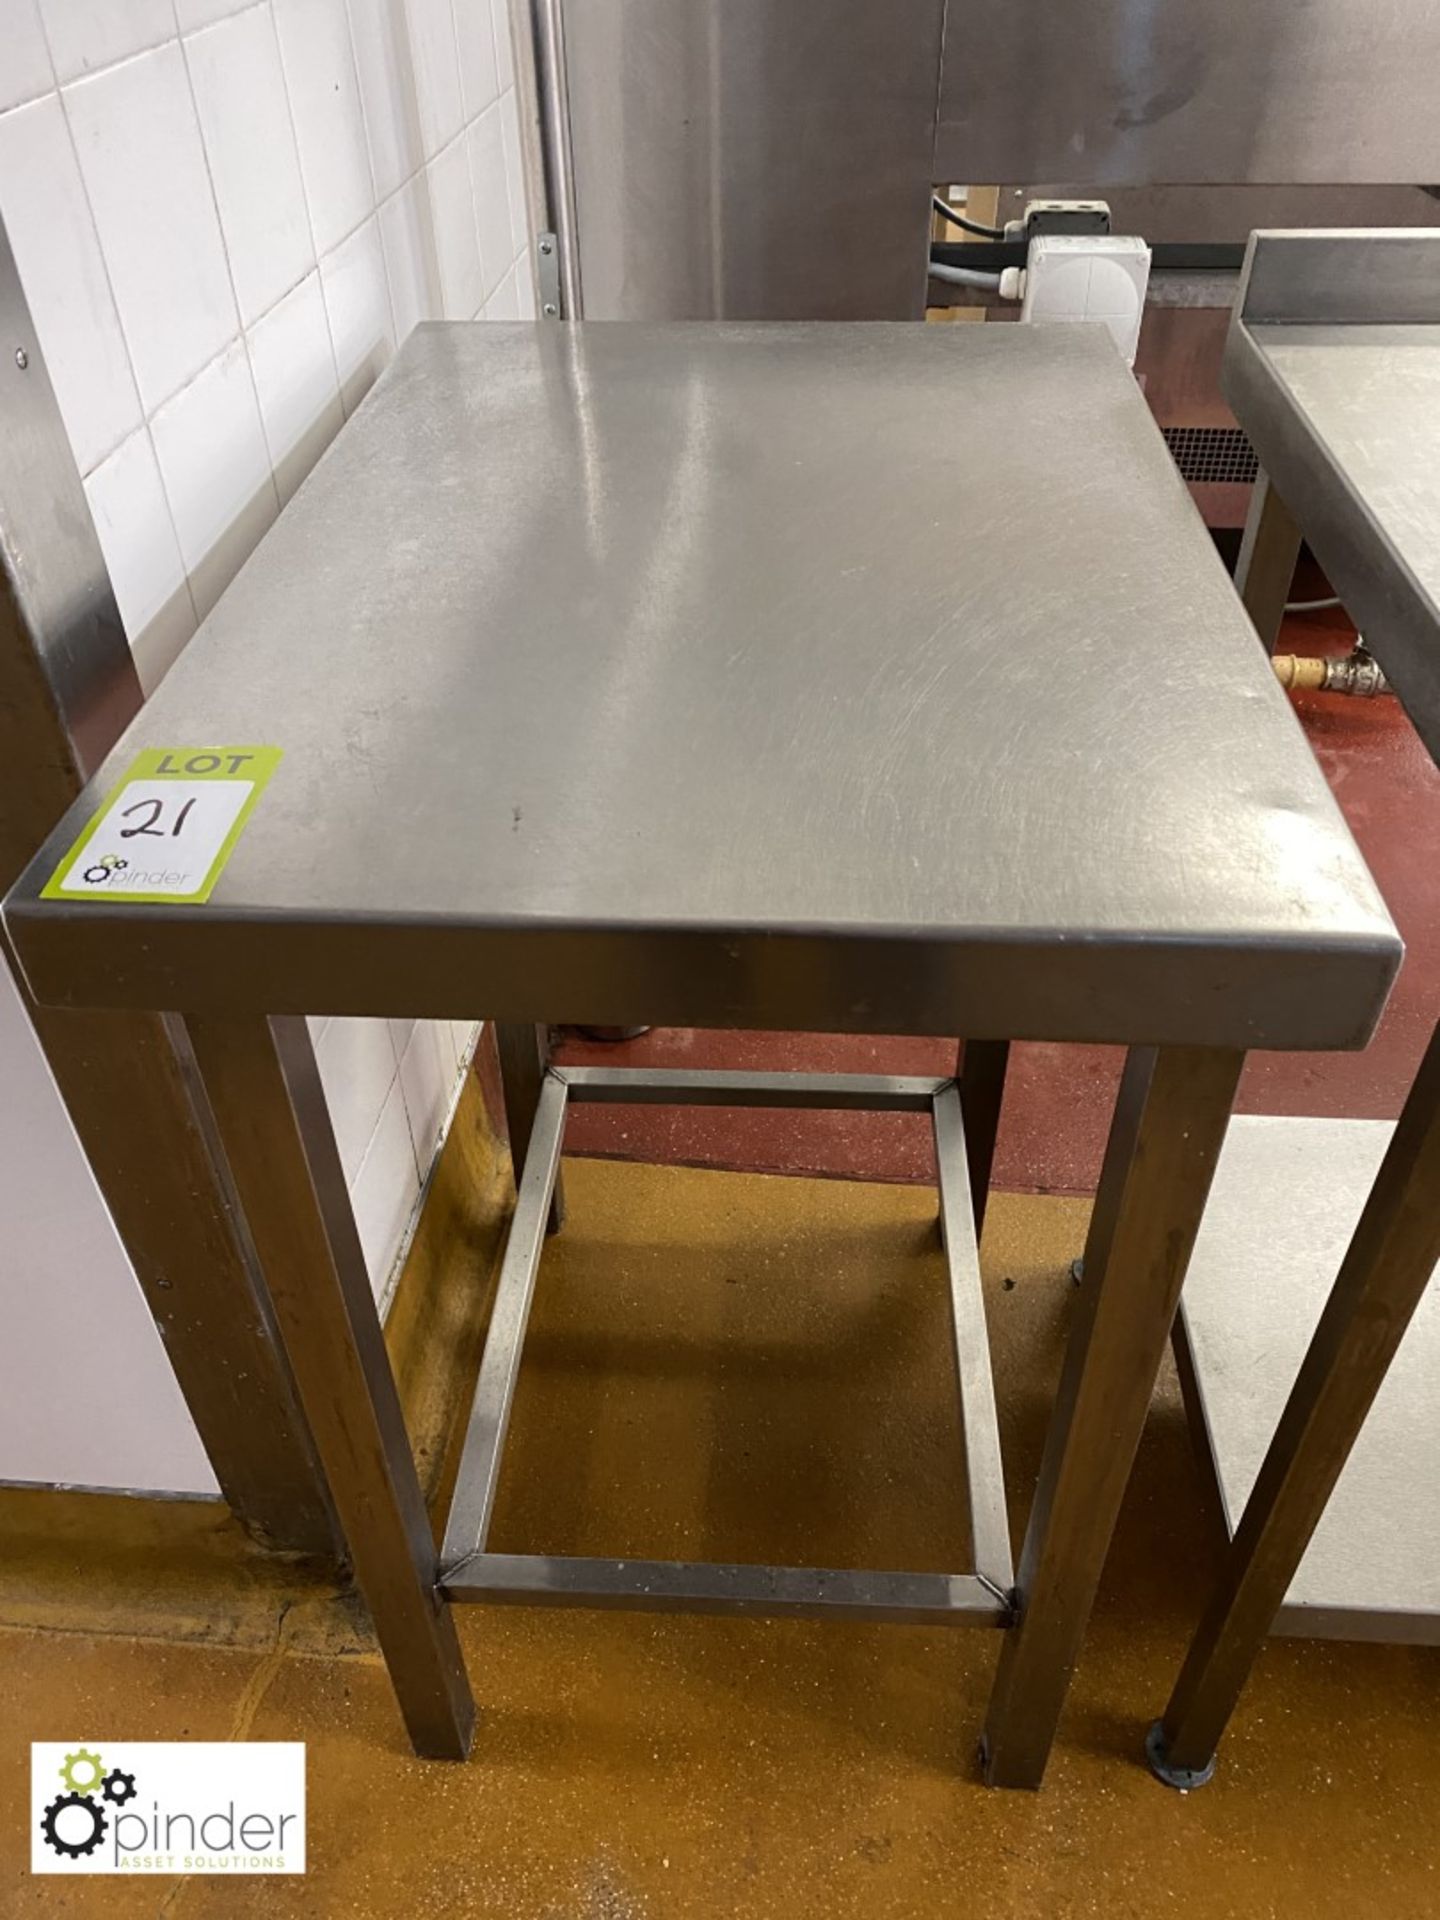 Stainless steel Preparation Table, 750mm x 530mm (located in Main Kitchen, Basement) **** please